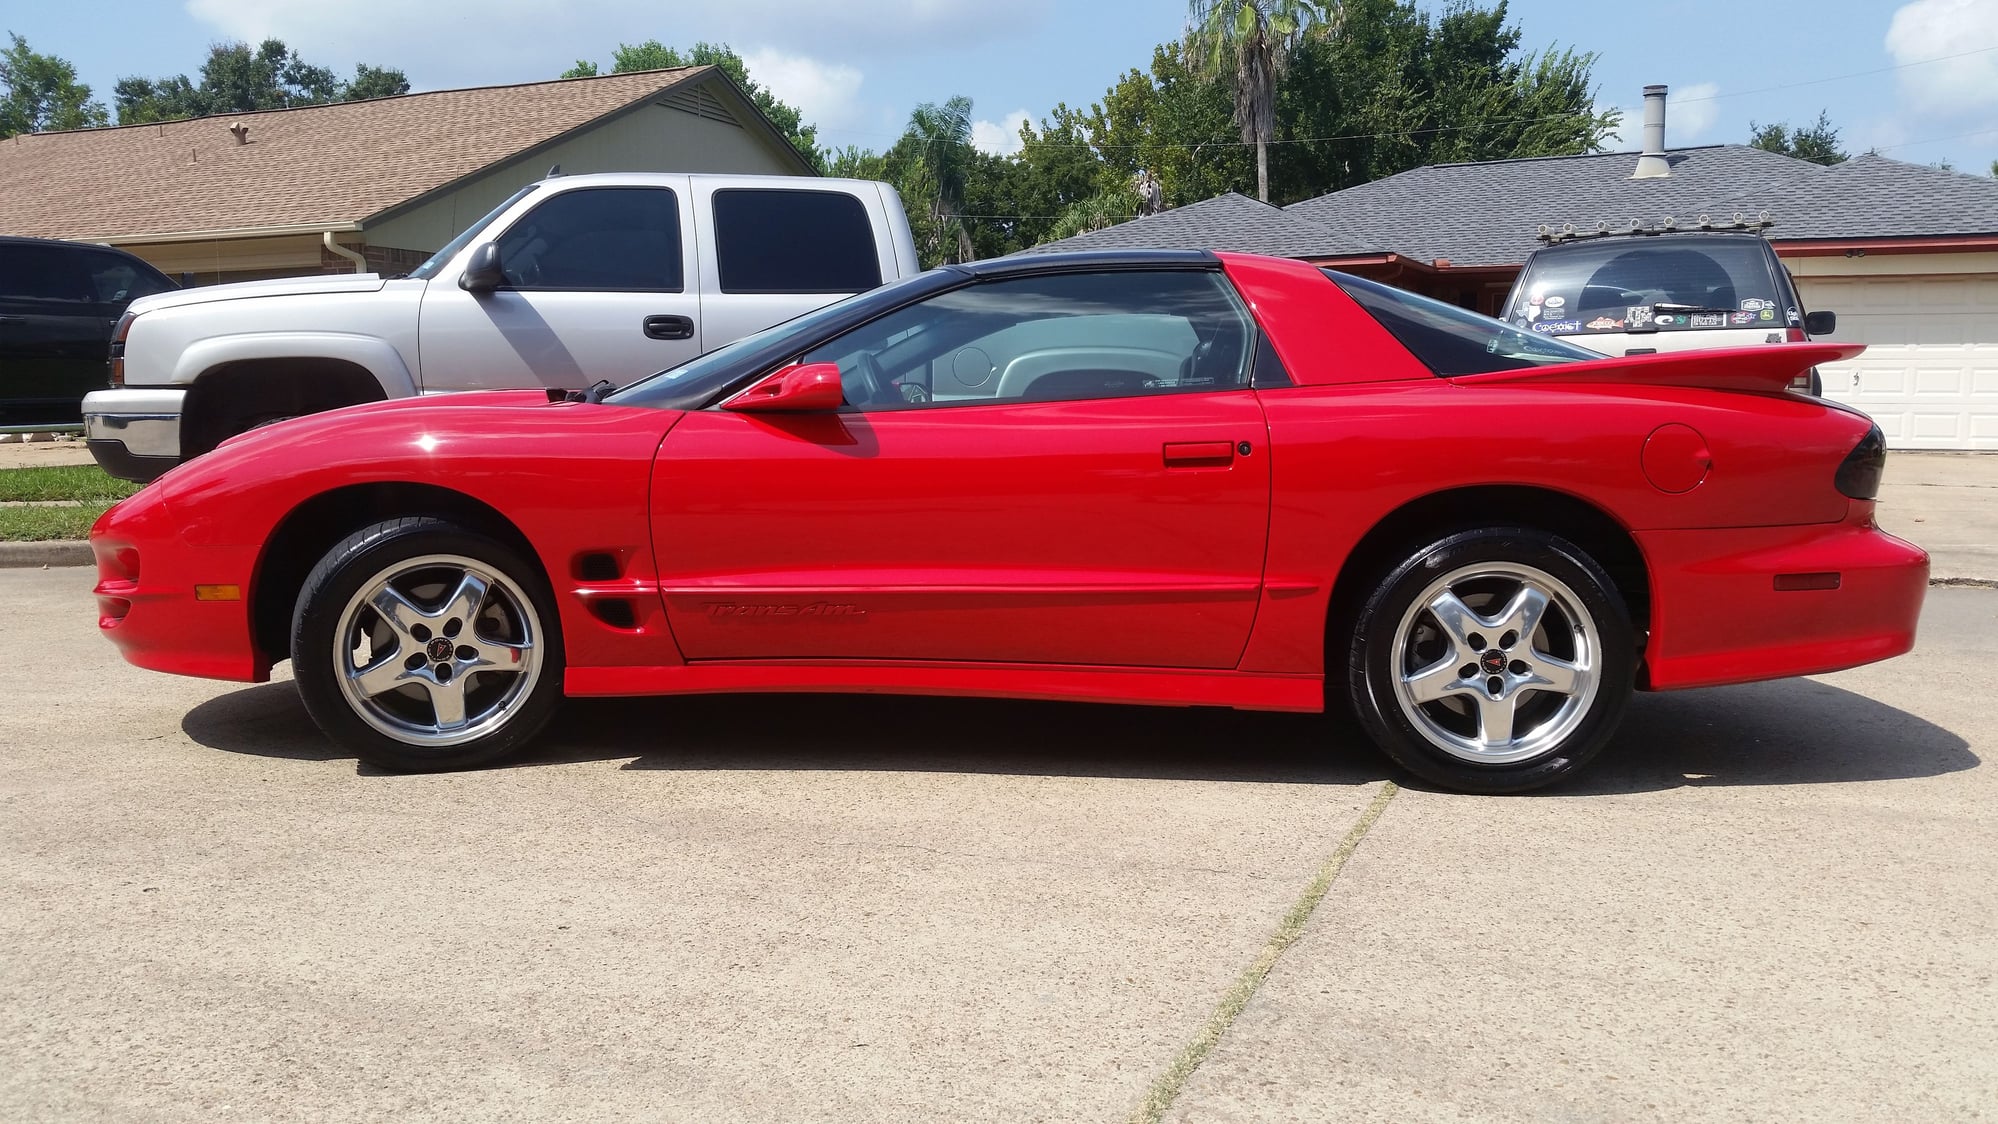 2001 Pontiac Firebird - 2001 Trans Am WS6 (SOLD) - Used - VIN 2G2FV22G112120699 - 50,000 Miles - 8 cyl - 2WD - Automatic - Coupe - Red - Angleton, TX 77515, United States